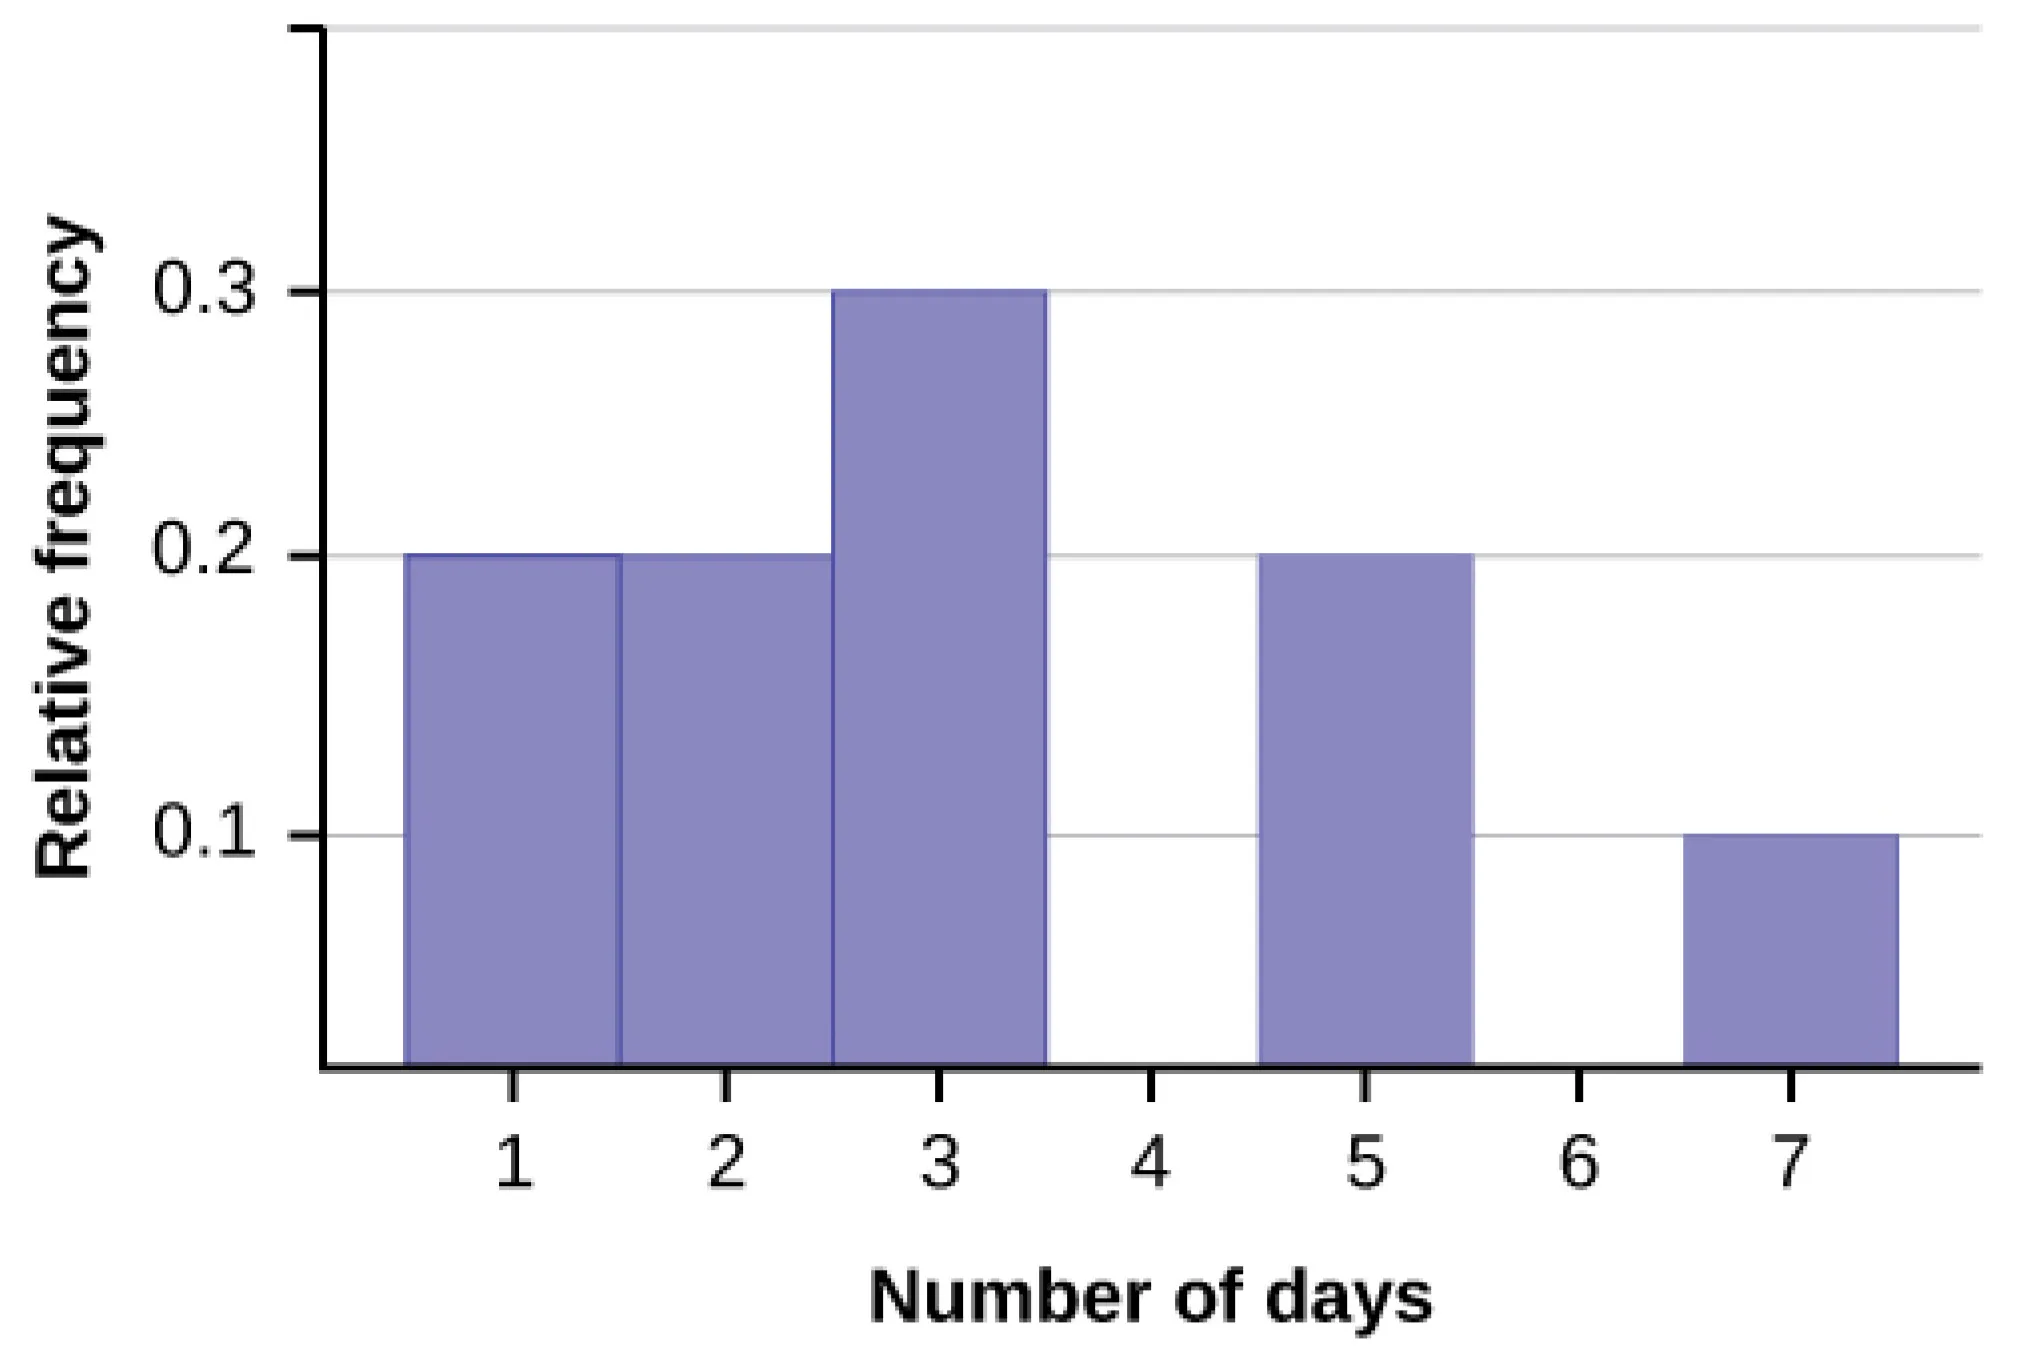 This shows a relative frequency histogram. The horizontal axis shows the number of days using whole numbers from 1 to 7. The vertical axis shows relative frequency in units of 0.1 from 0.1 to 0.3. The graph shows the following proportions: 0.2 of responses are 1, 0.2 are 2, 0.3 are 3, 0.2 are 5, and 0.1 of responses are 7.